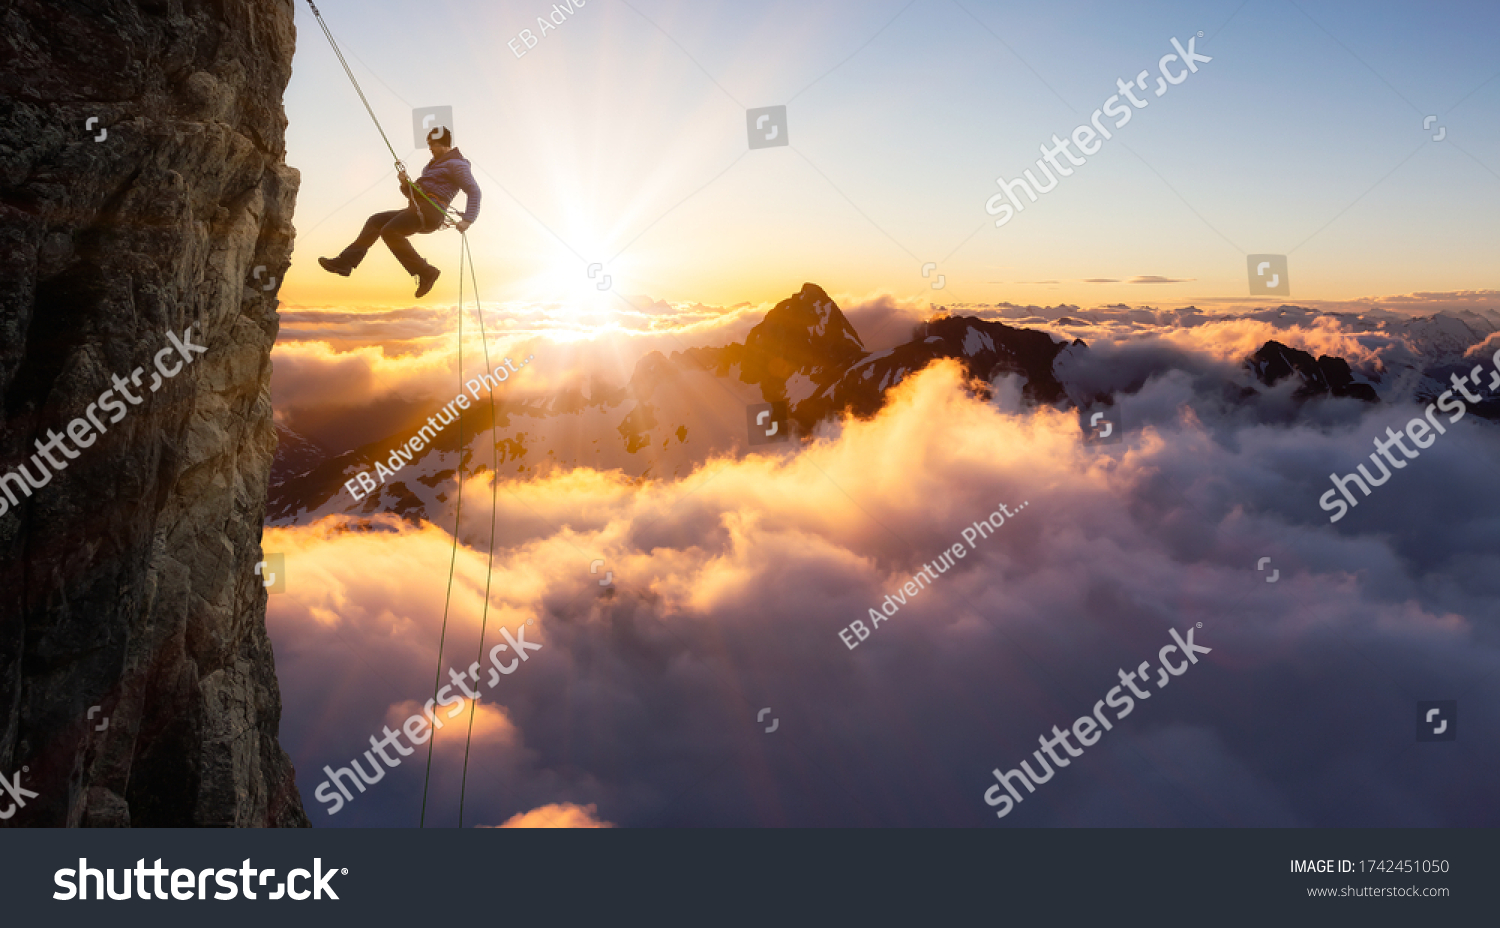 Epic Adventurous Extreme Sport Composite of Rock Climbing Man Rappelling from a Cliff. Mountain Landscape Background from British Columbia, Canada. Concept: Explore, Hike, Adventure, Lifestyle #1742451050